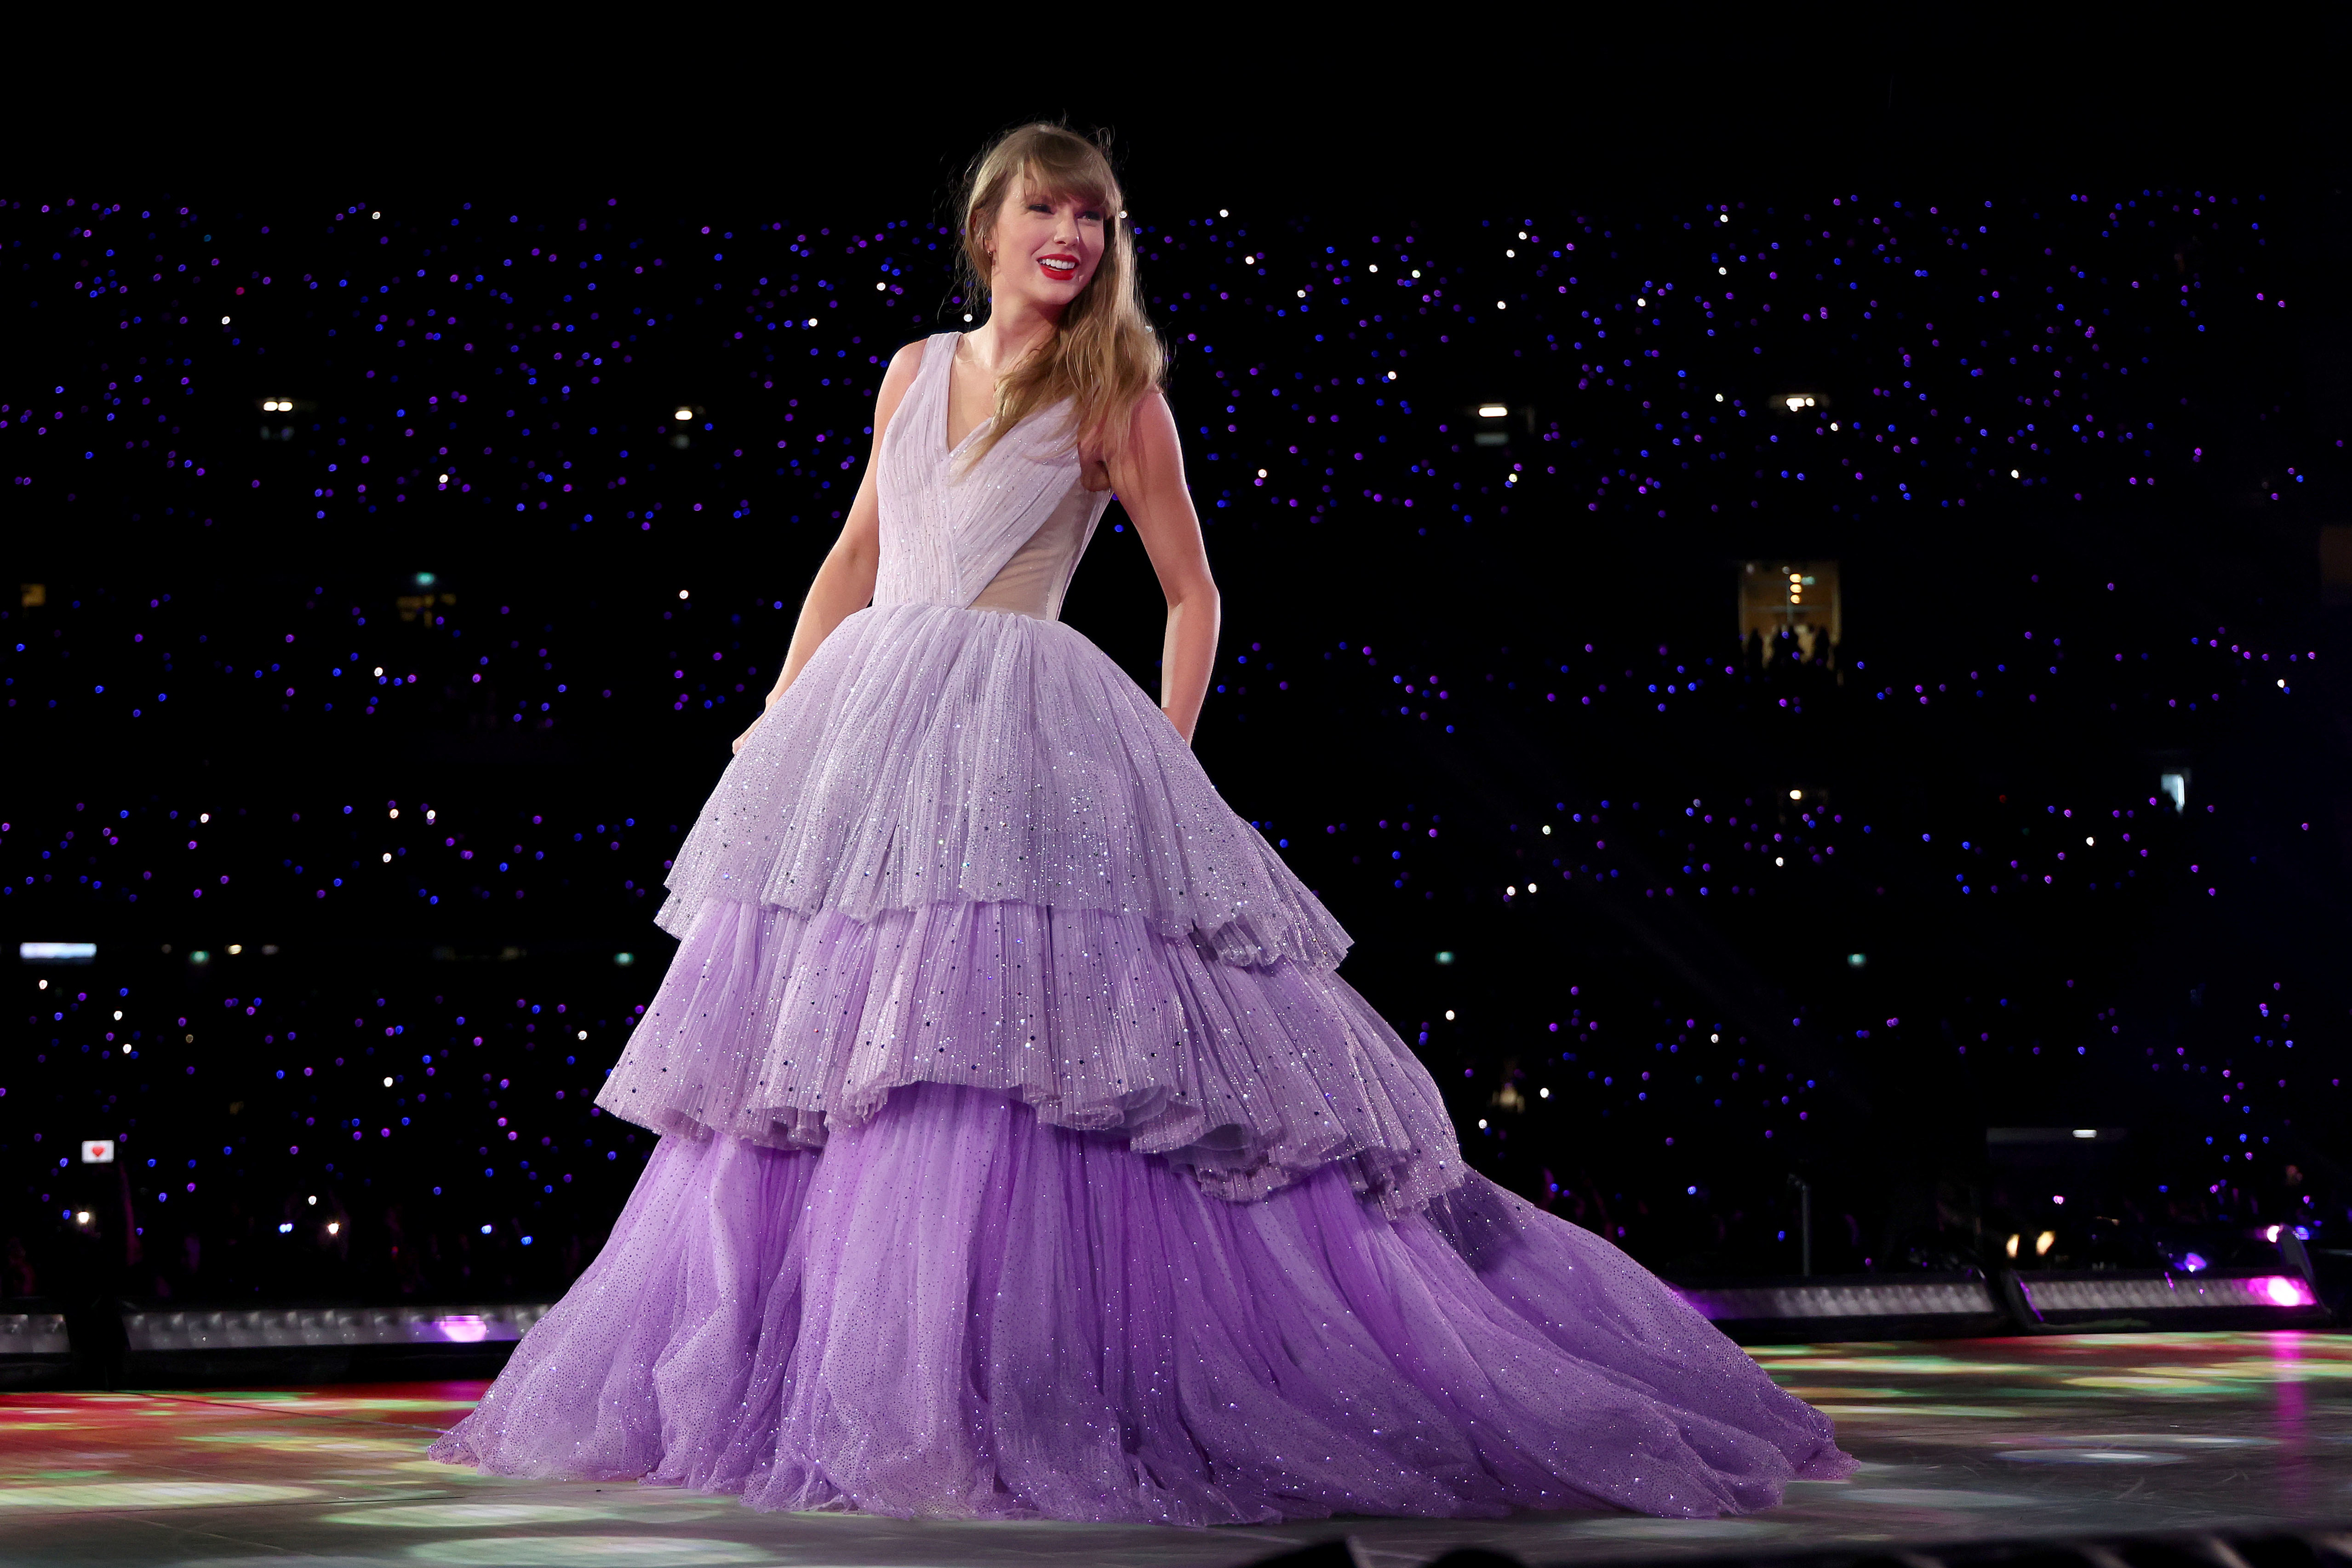 Taylor Swift in a layered gown at a night concert with sparkling background lights